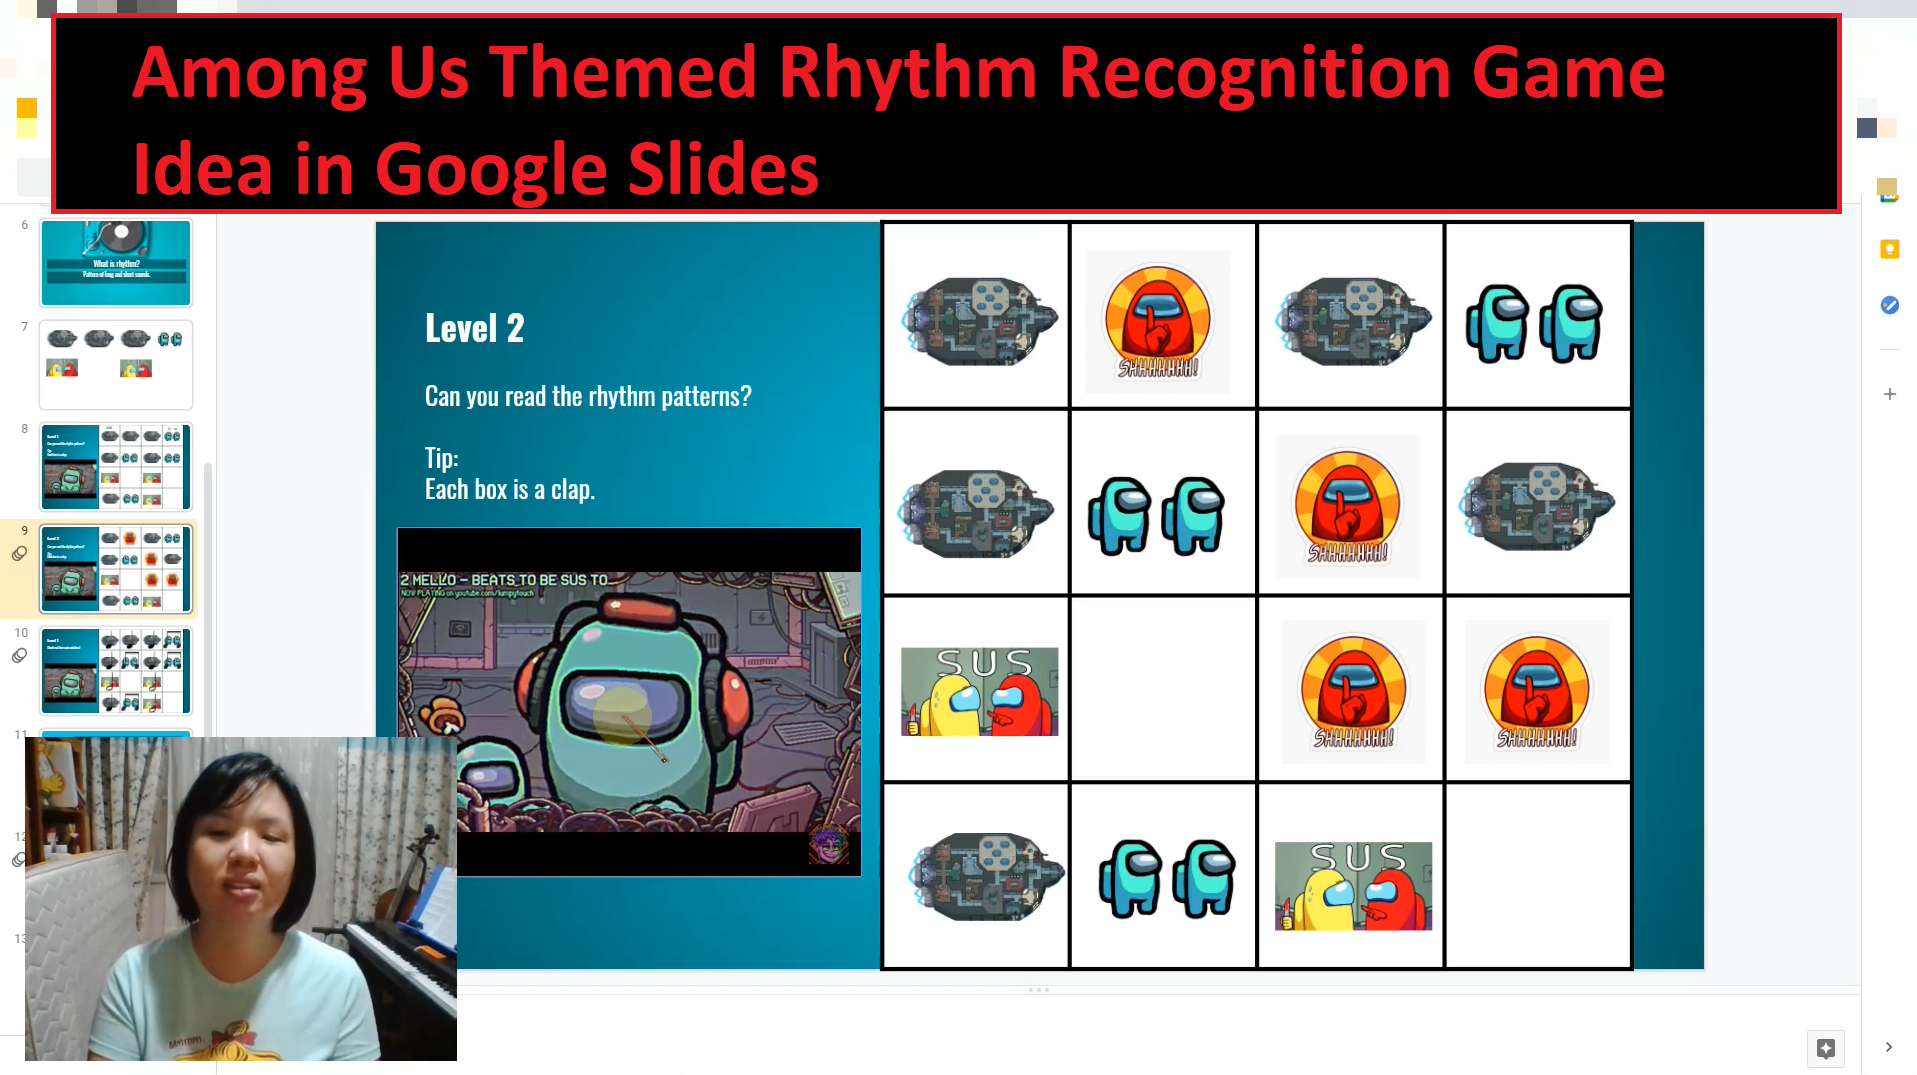 Among Us Themed Rhythm Recognition Game Idea in Google Slides